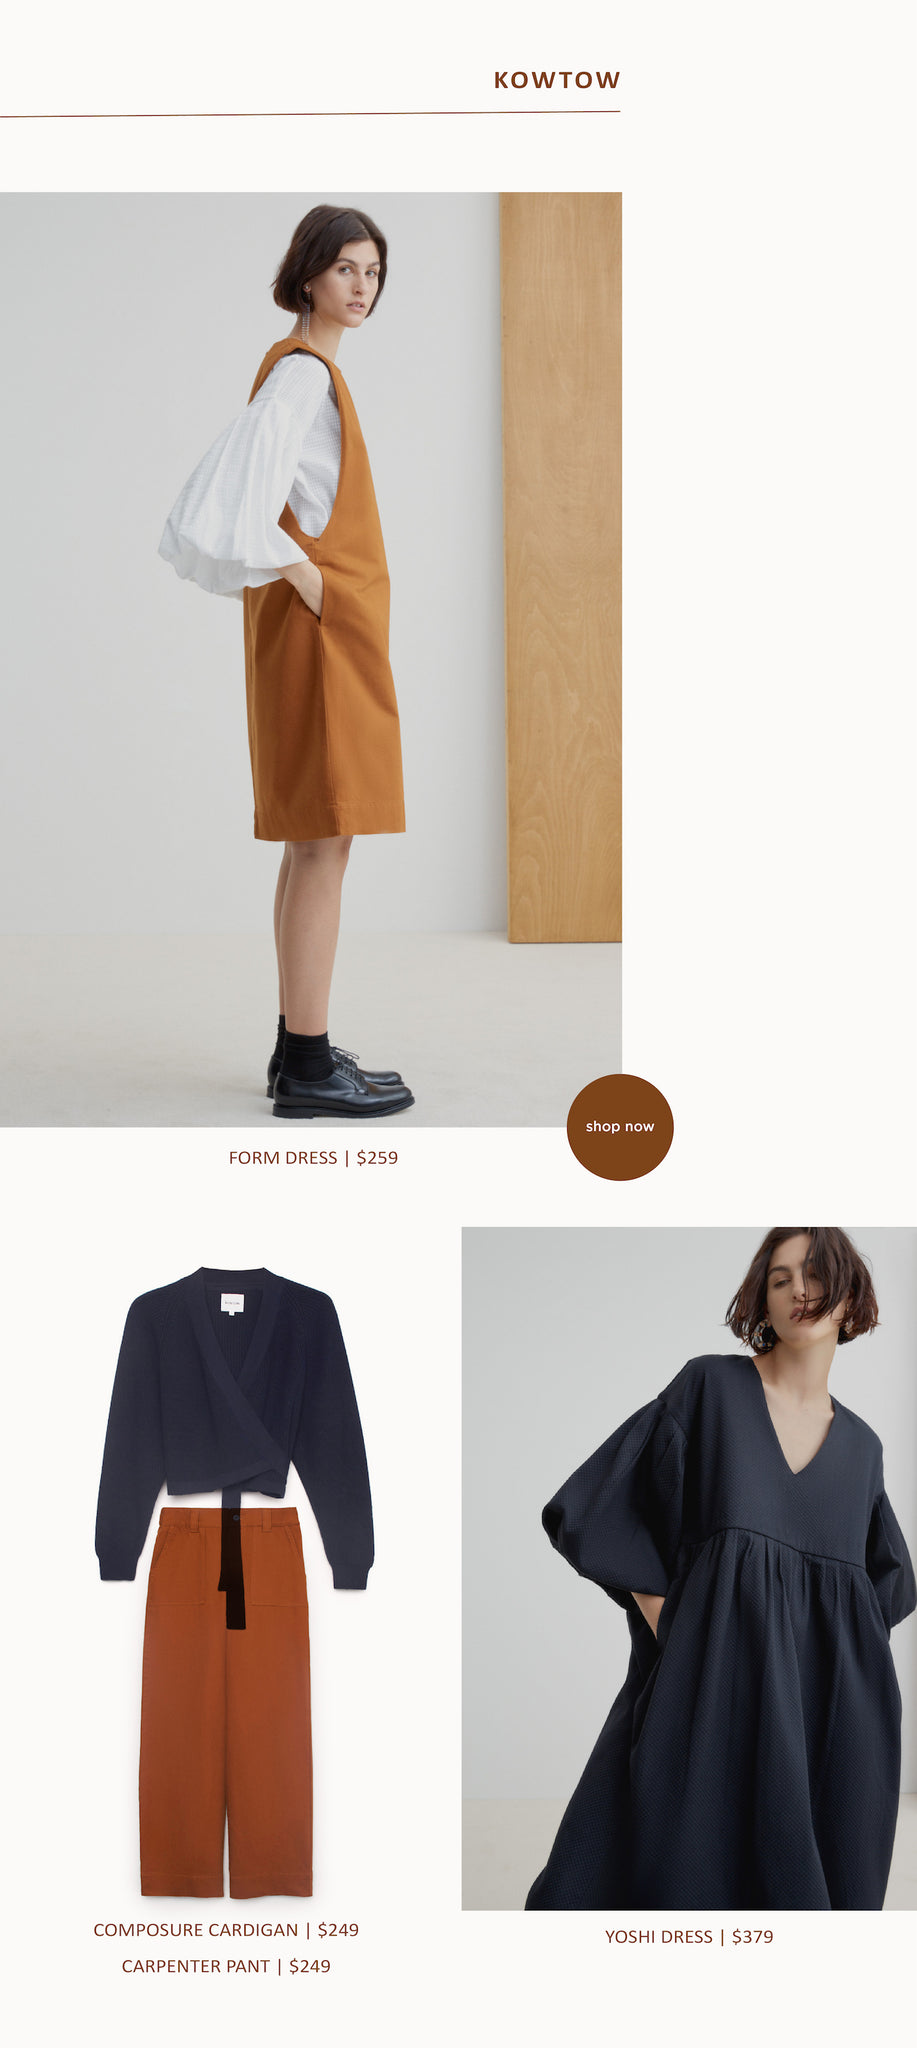 Paper Plane - Wardrobe Update - Kowtow - Elk - Velvet Canyon - In Store Now - Mount Maunganui